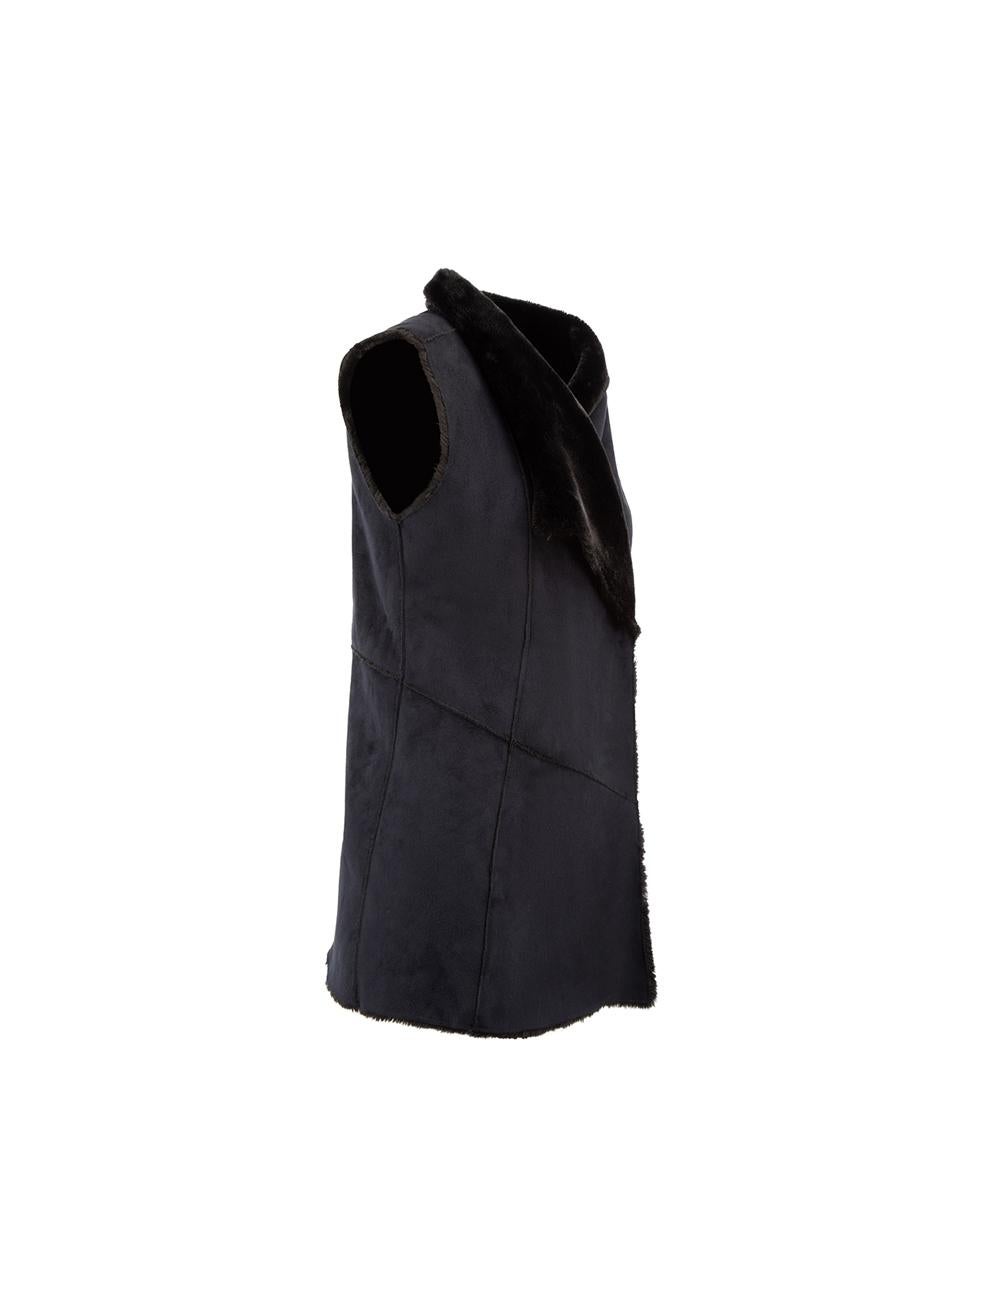 CONDITION is Very good. Minimal wear to gilet is evident. Minimal wear to the suede exterior on this used Armani Jeans designer resale item. 



Details


Navy

Faux suede

hip length gilet

Double breasted with snap buttons

Sleeveless

Faux fur